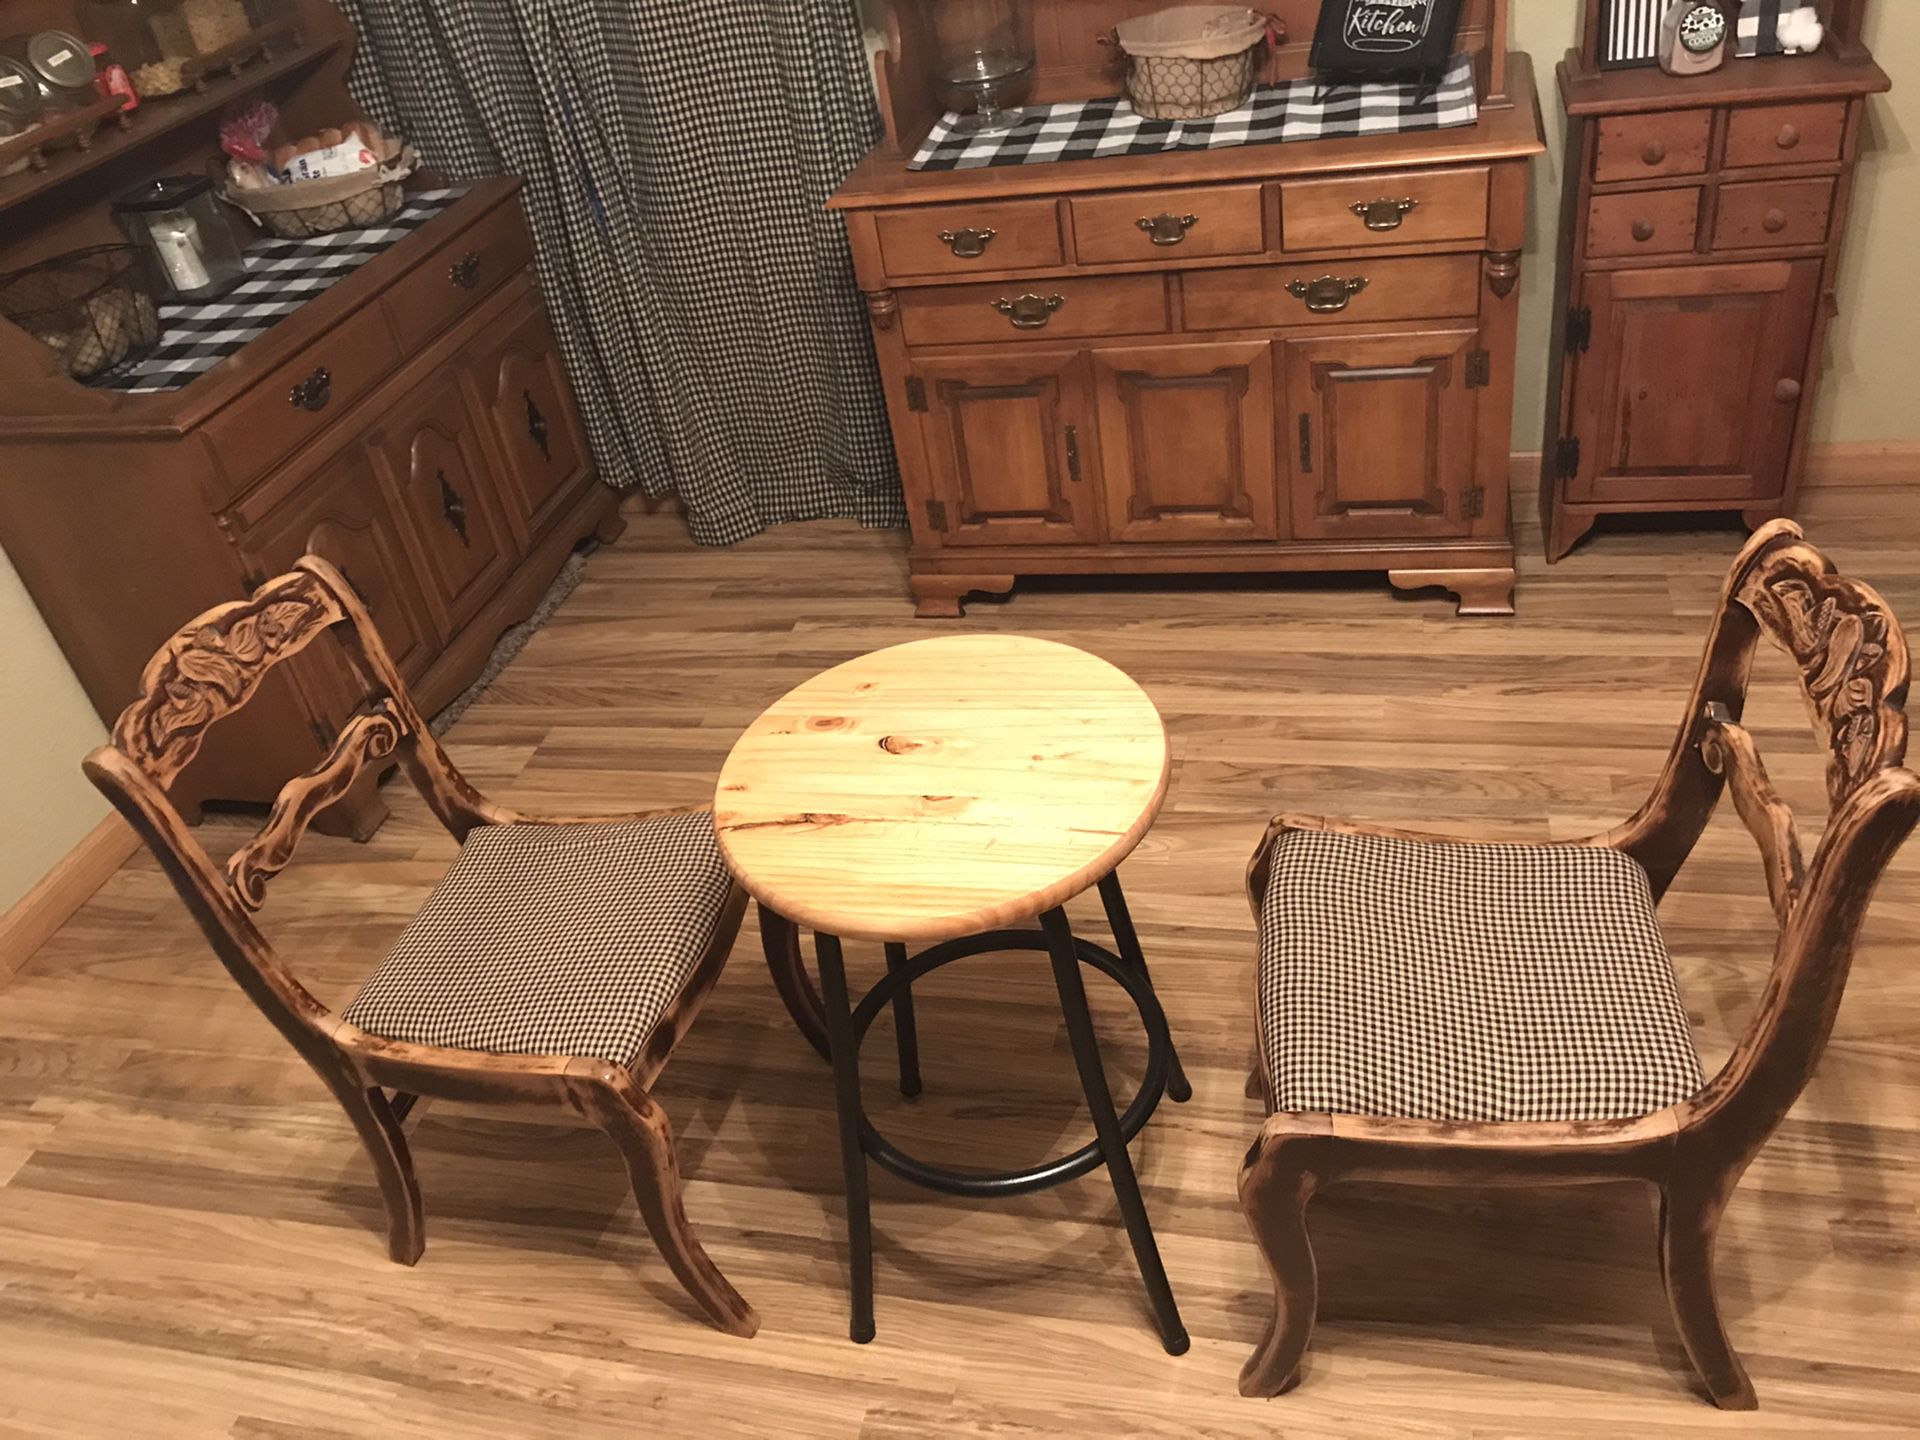 Swivel table and two chairs